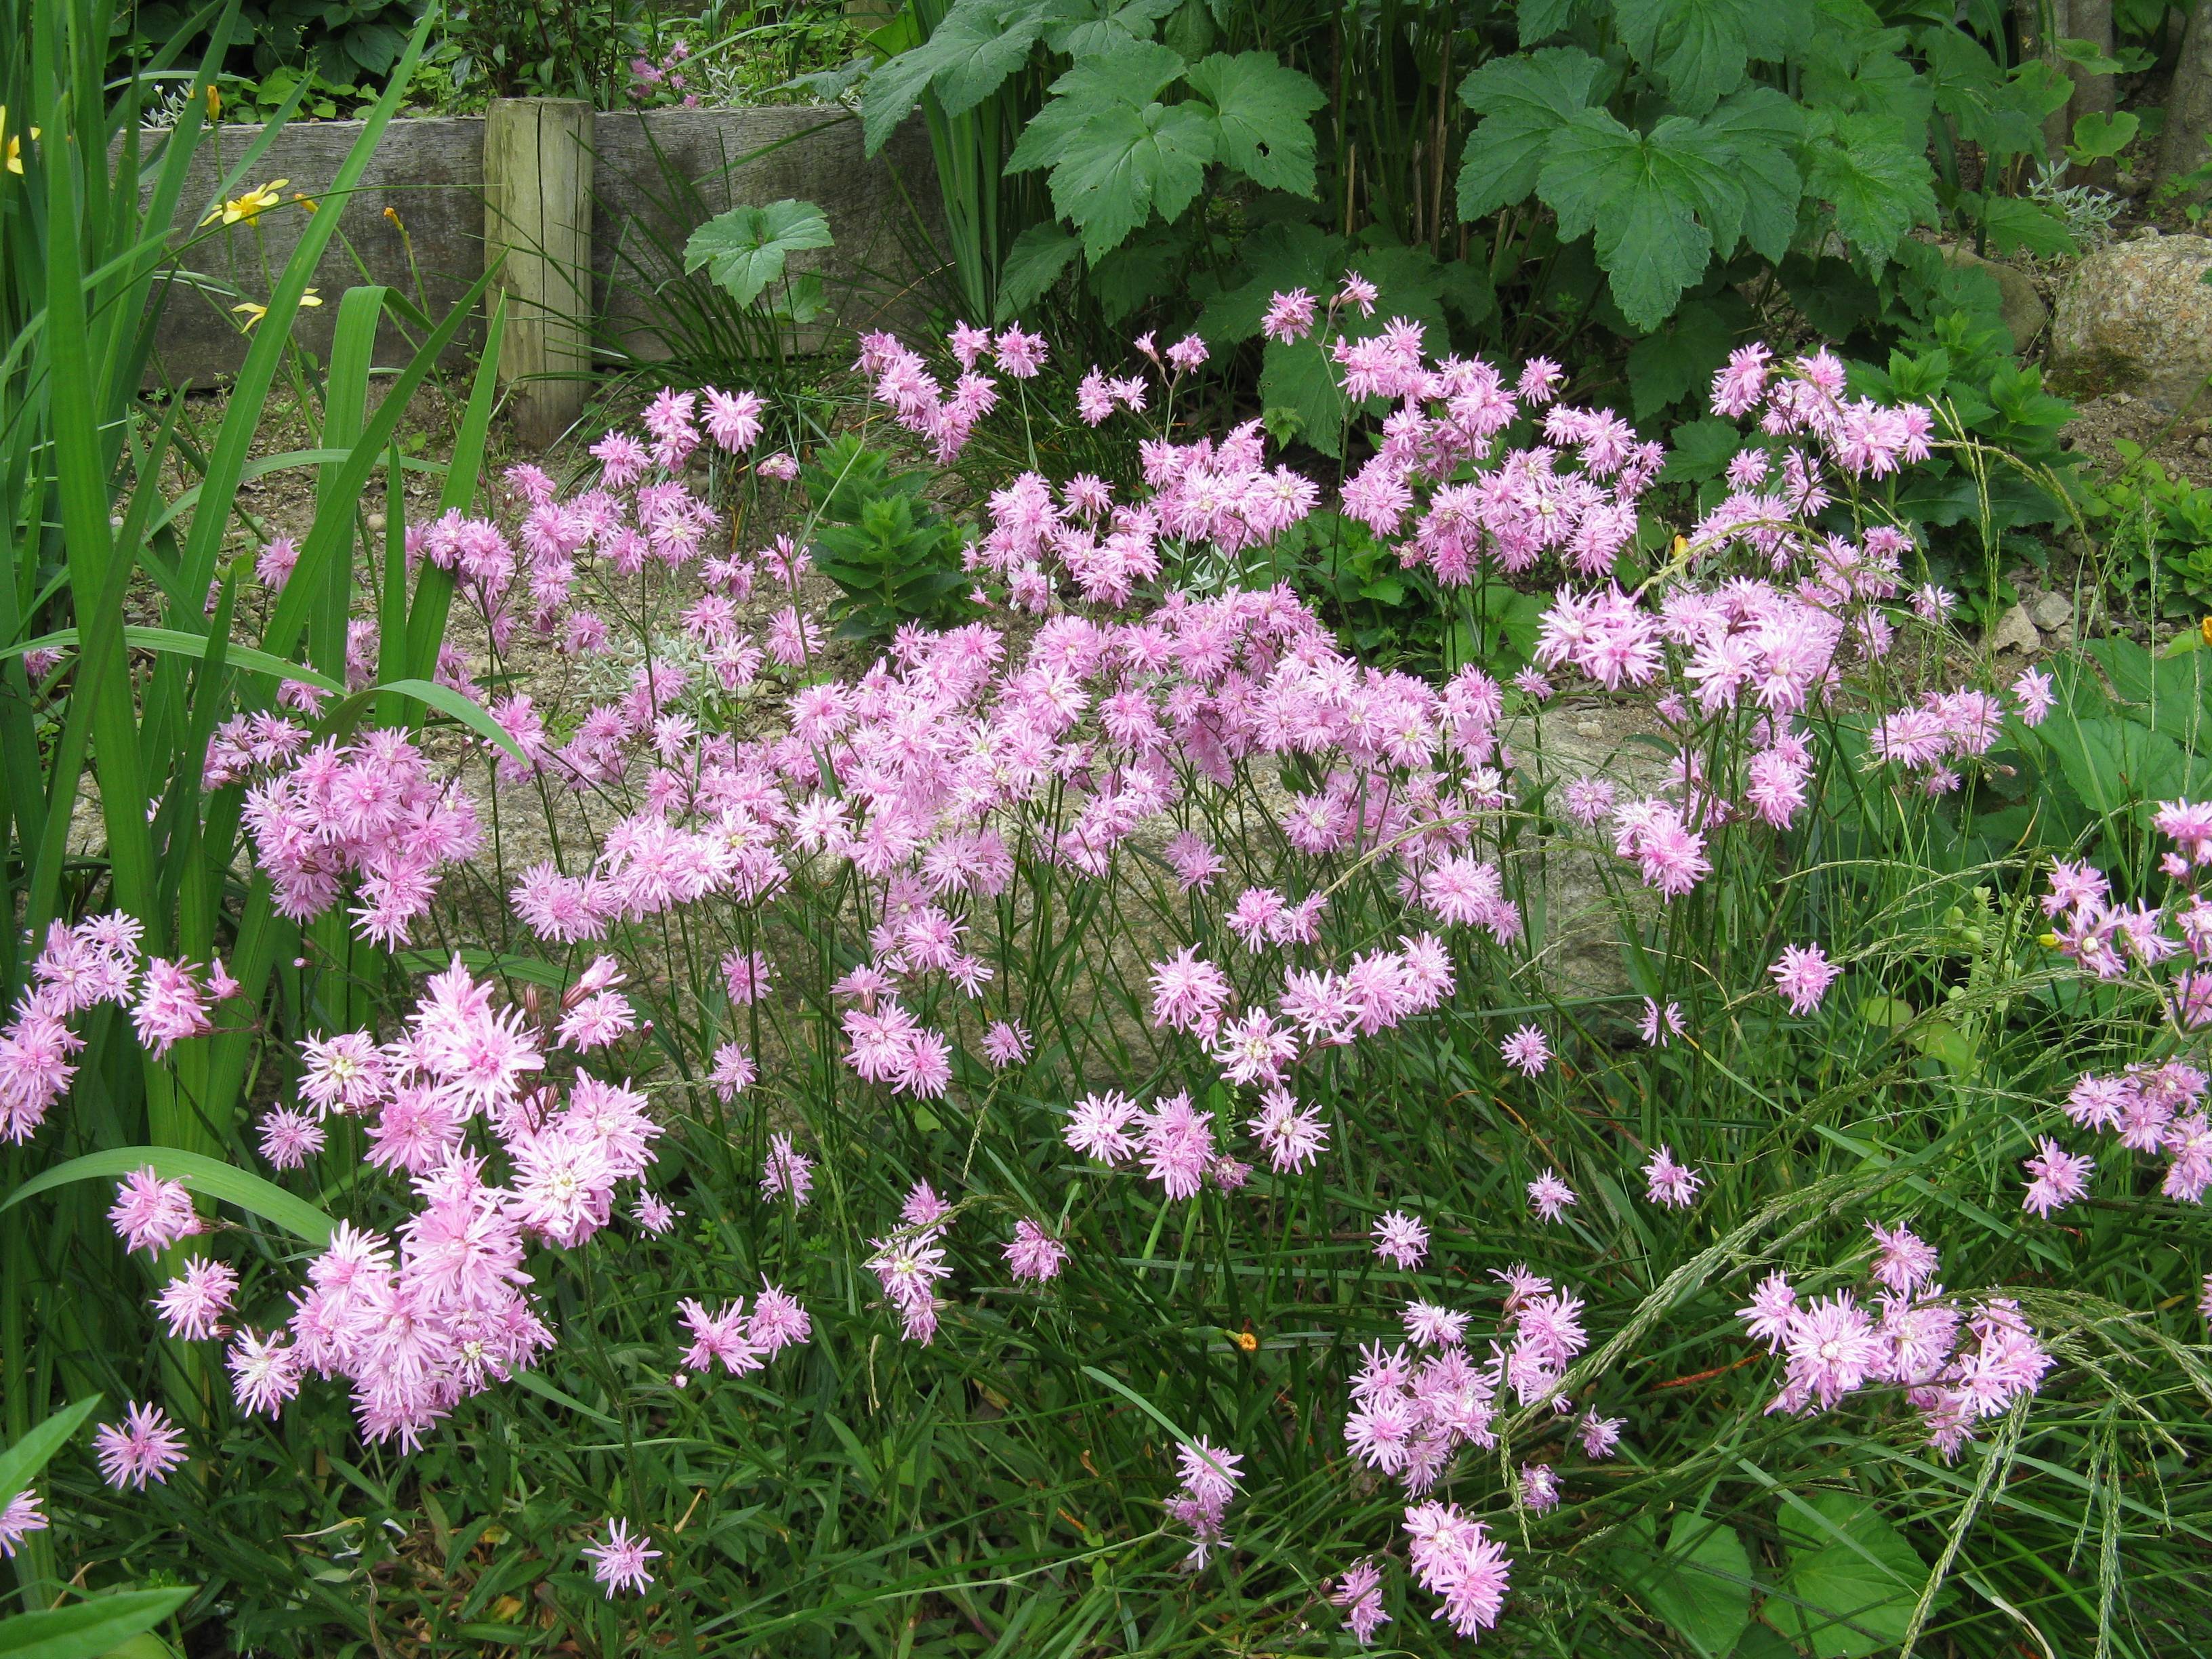 light-pink flowers with green leaves and stems